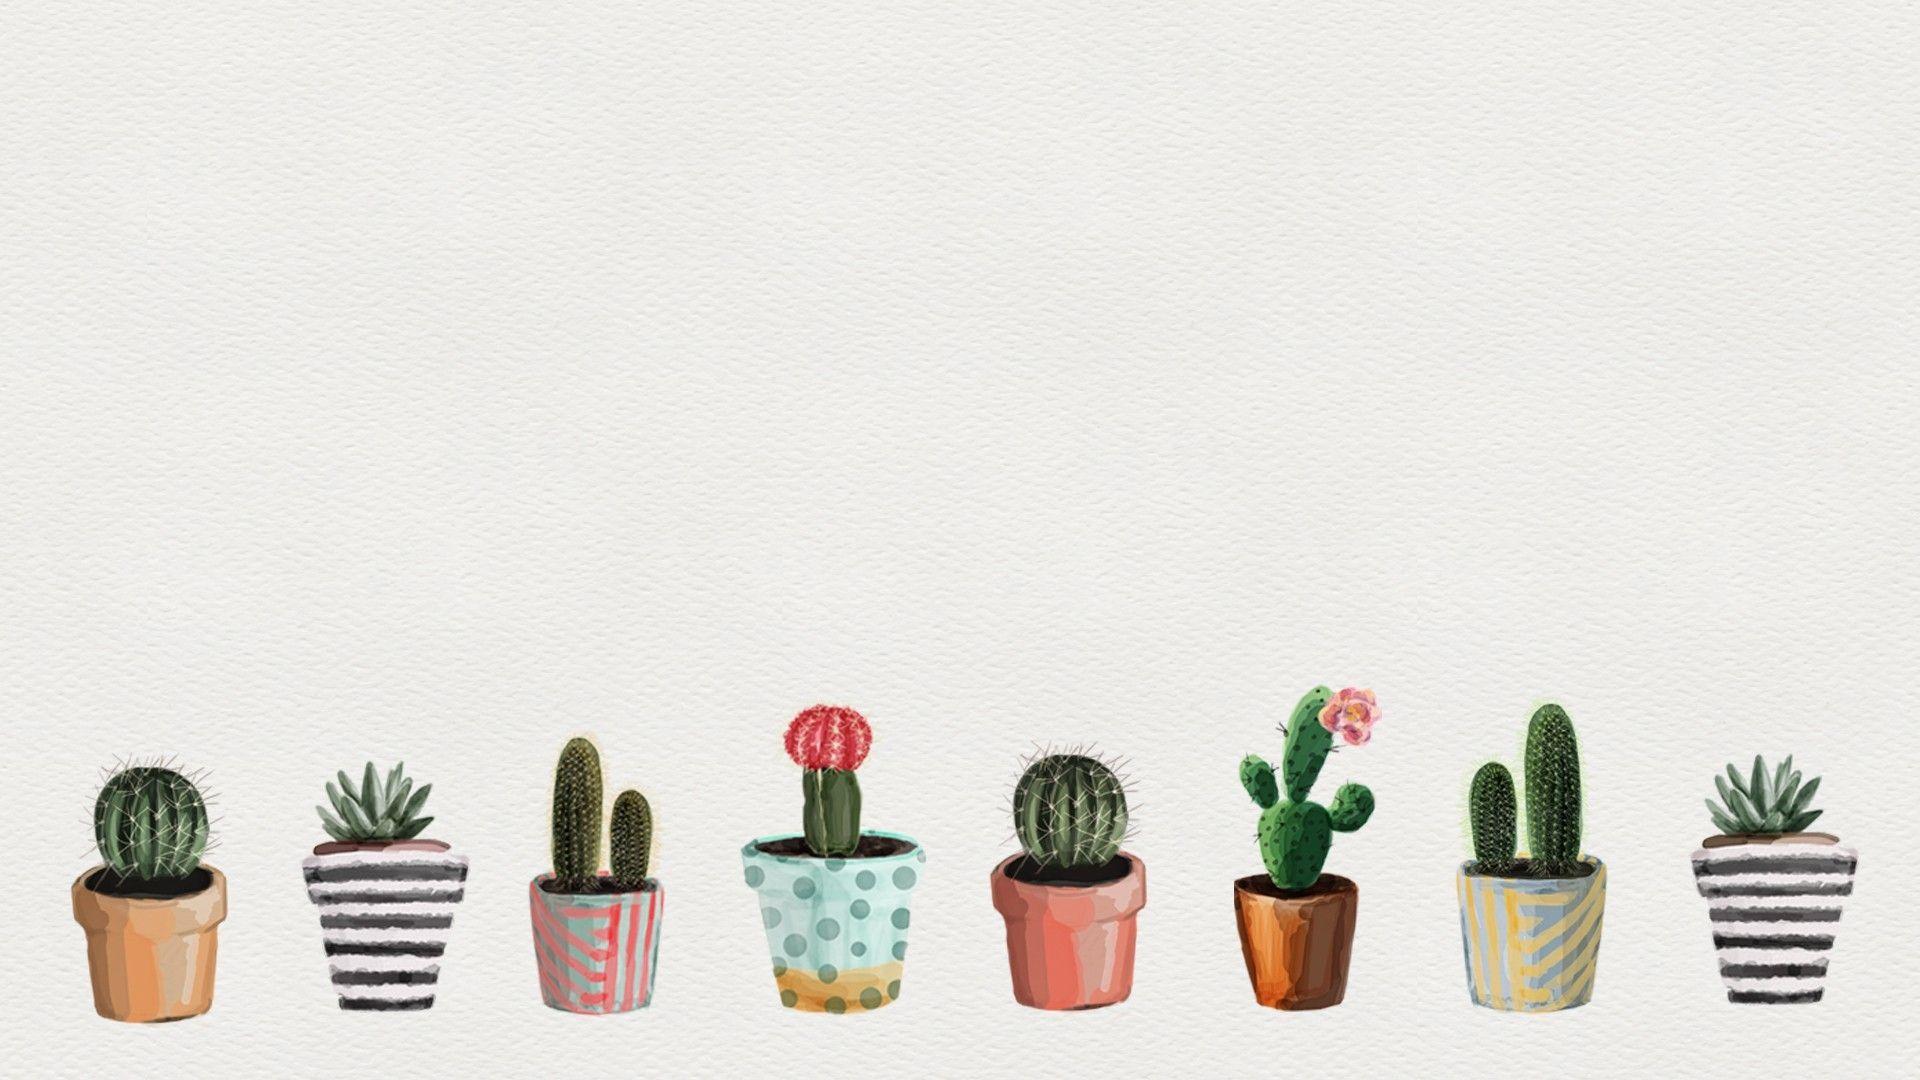 Kawaii Cute Cute Cuties Cactus Wallpaper 4k Background Cute Cactus  Pictures Background Image And Wallpaper for Free Download